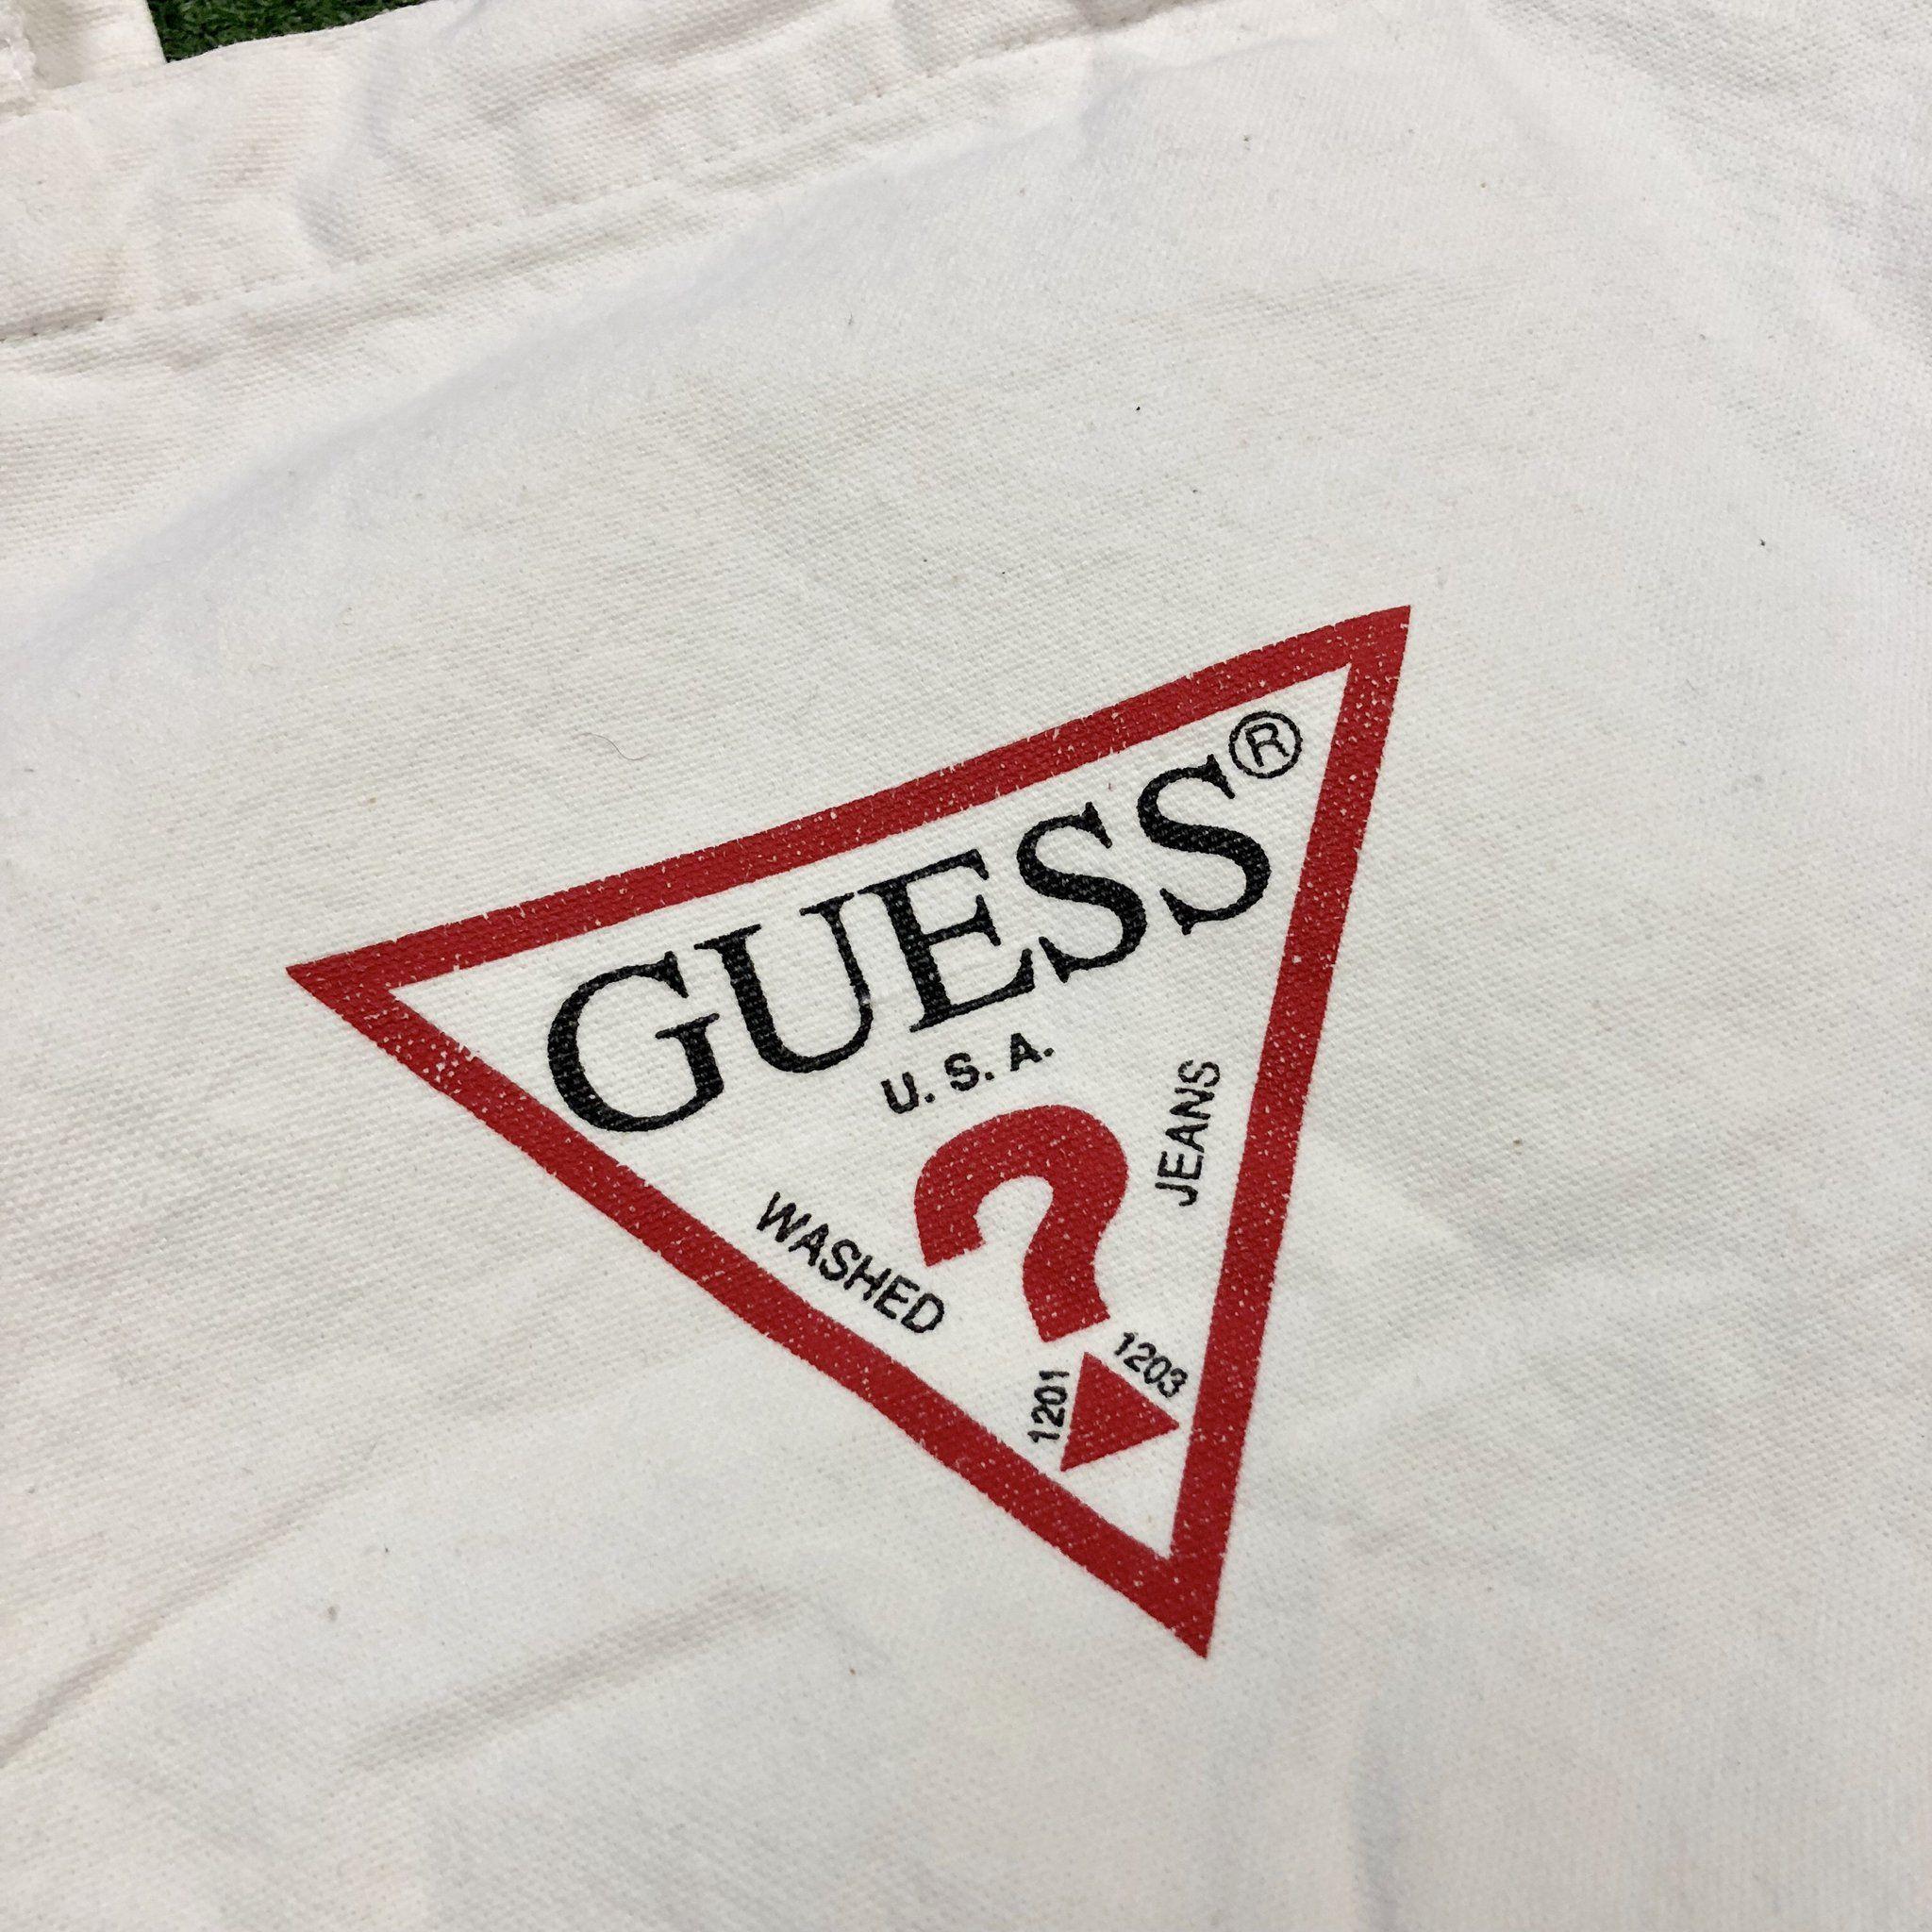 Guess Jeans Logo - 90s Guess Jeans Logo Tote